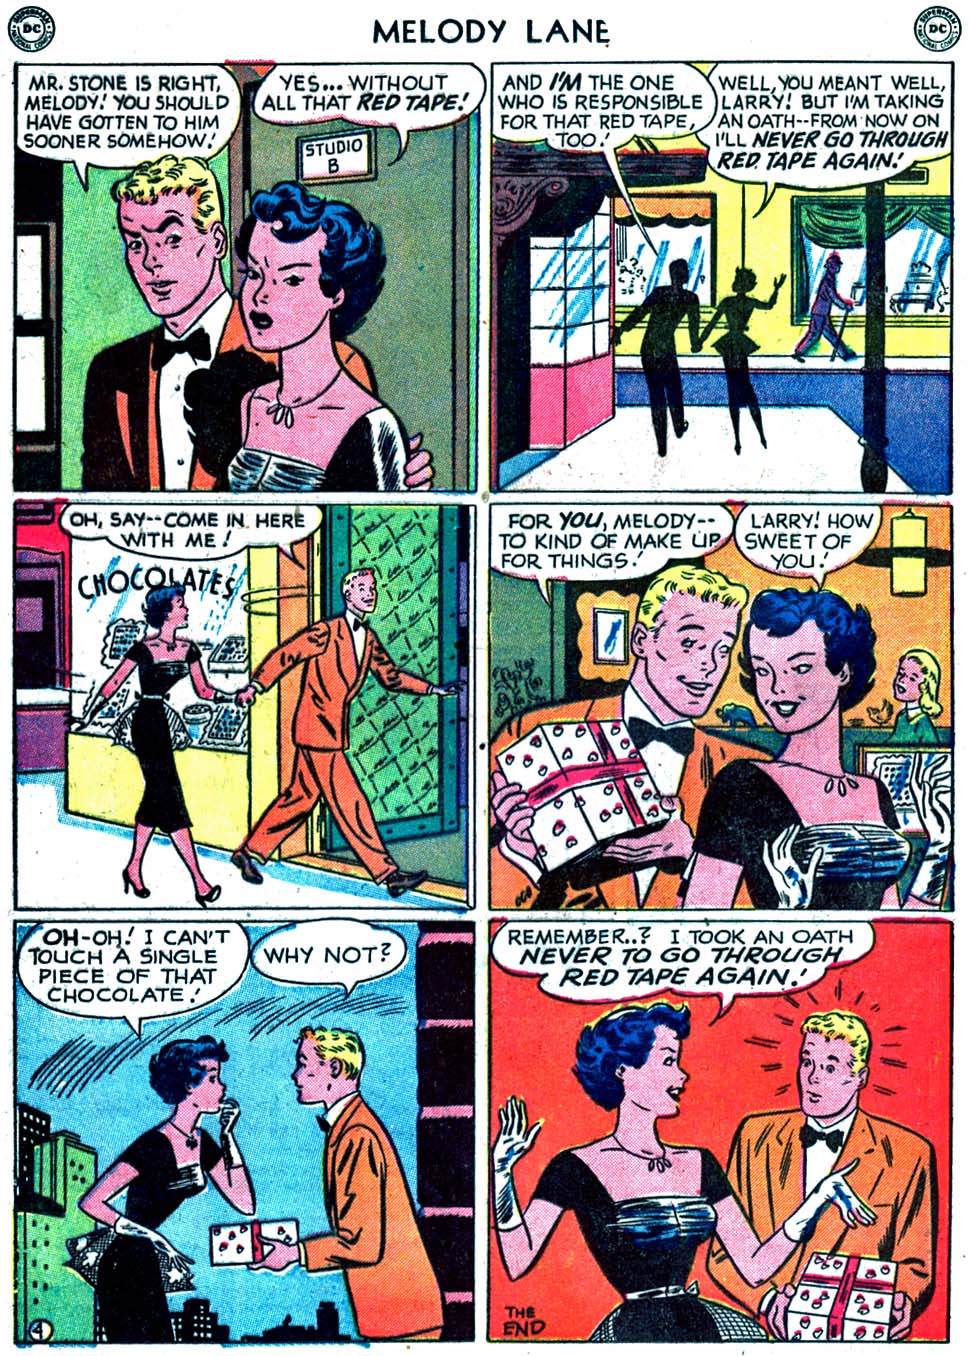 Read online Miss Melody Lane of Broadway comic -  Issue #2 - 30